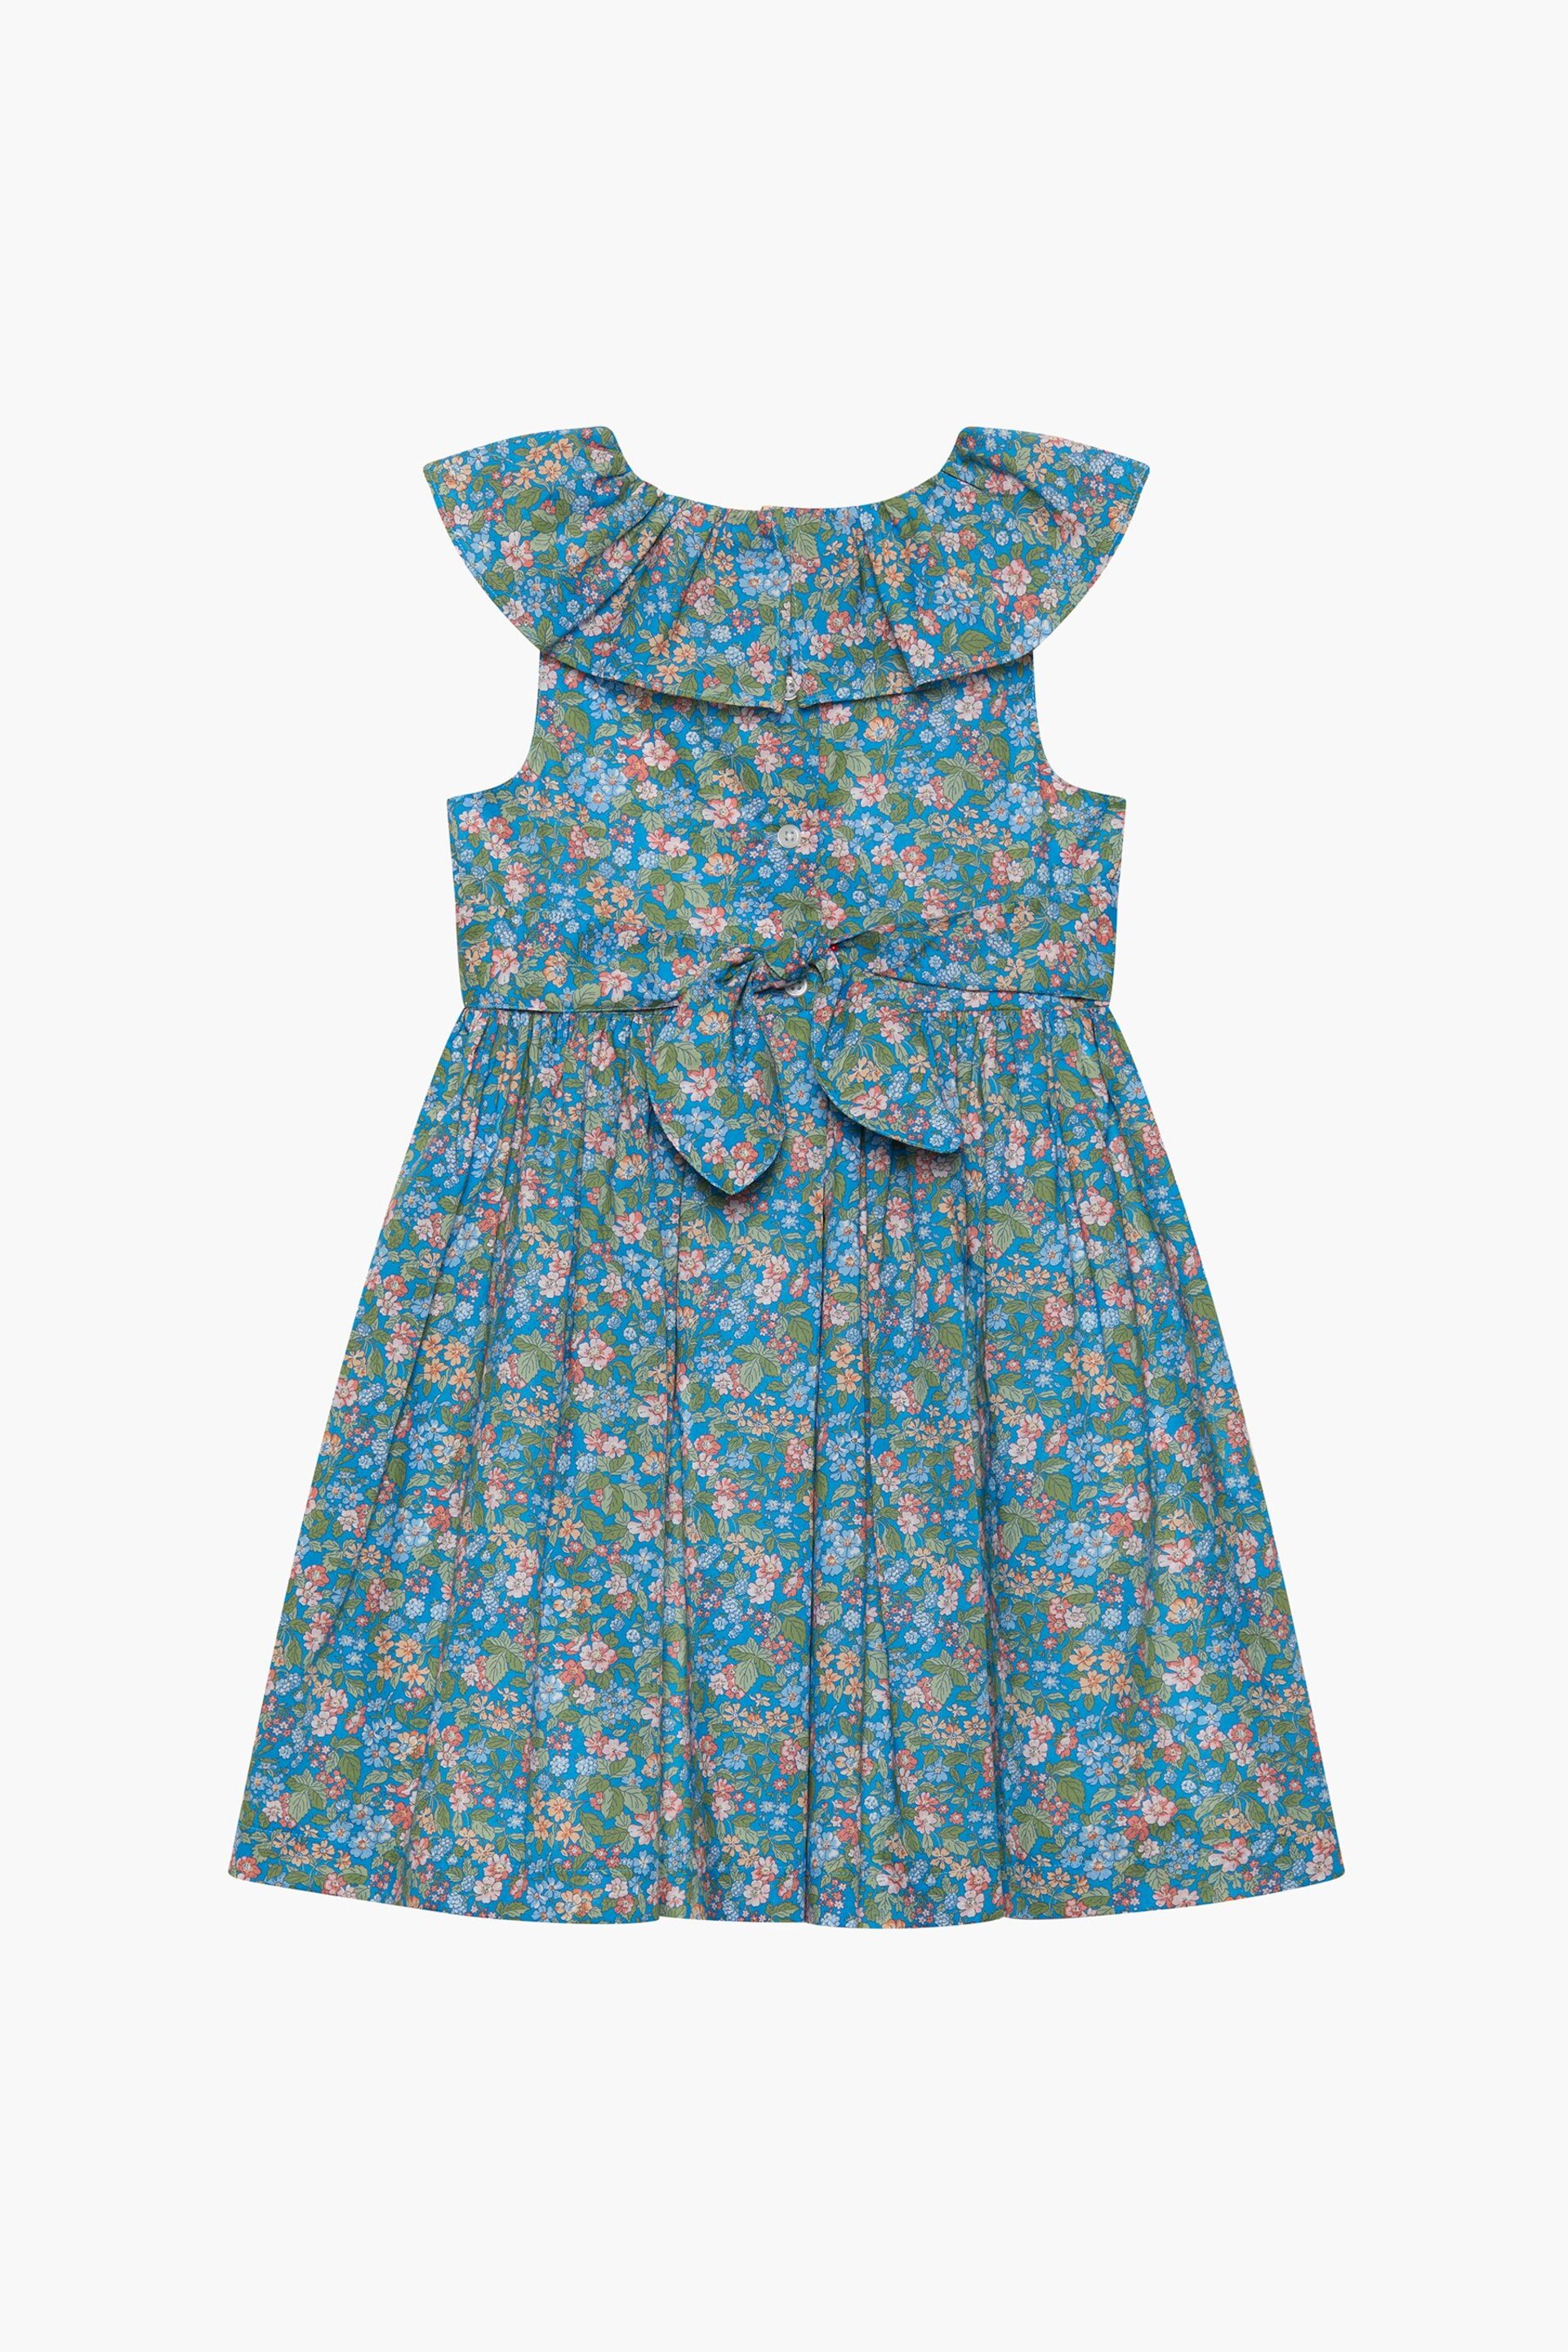 Trotters London Liberty Print Blue Hedgerow Ramble Cotton Willow Dress - Image 2 of 3